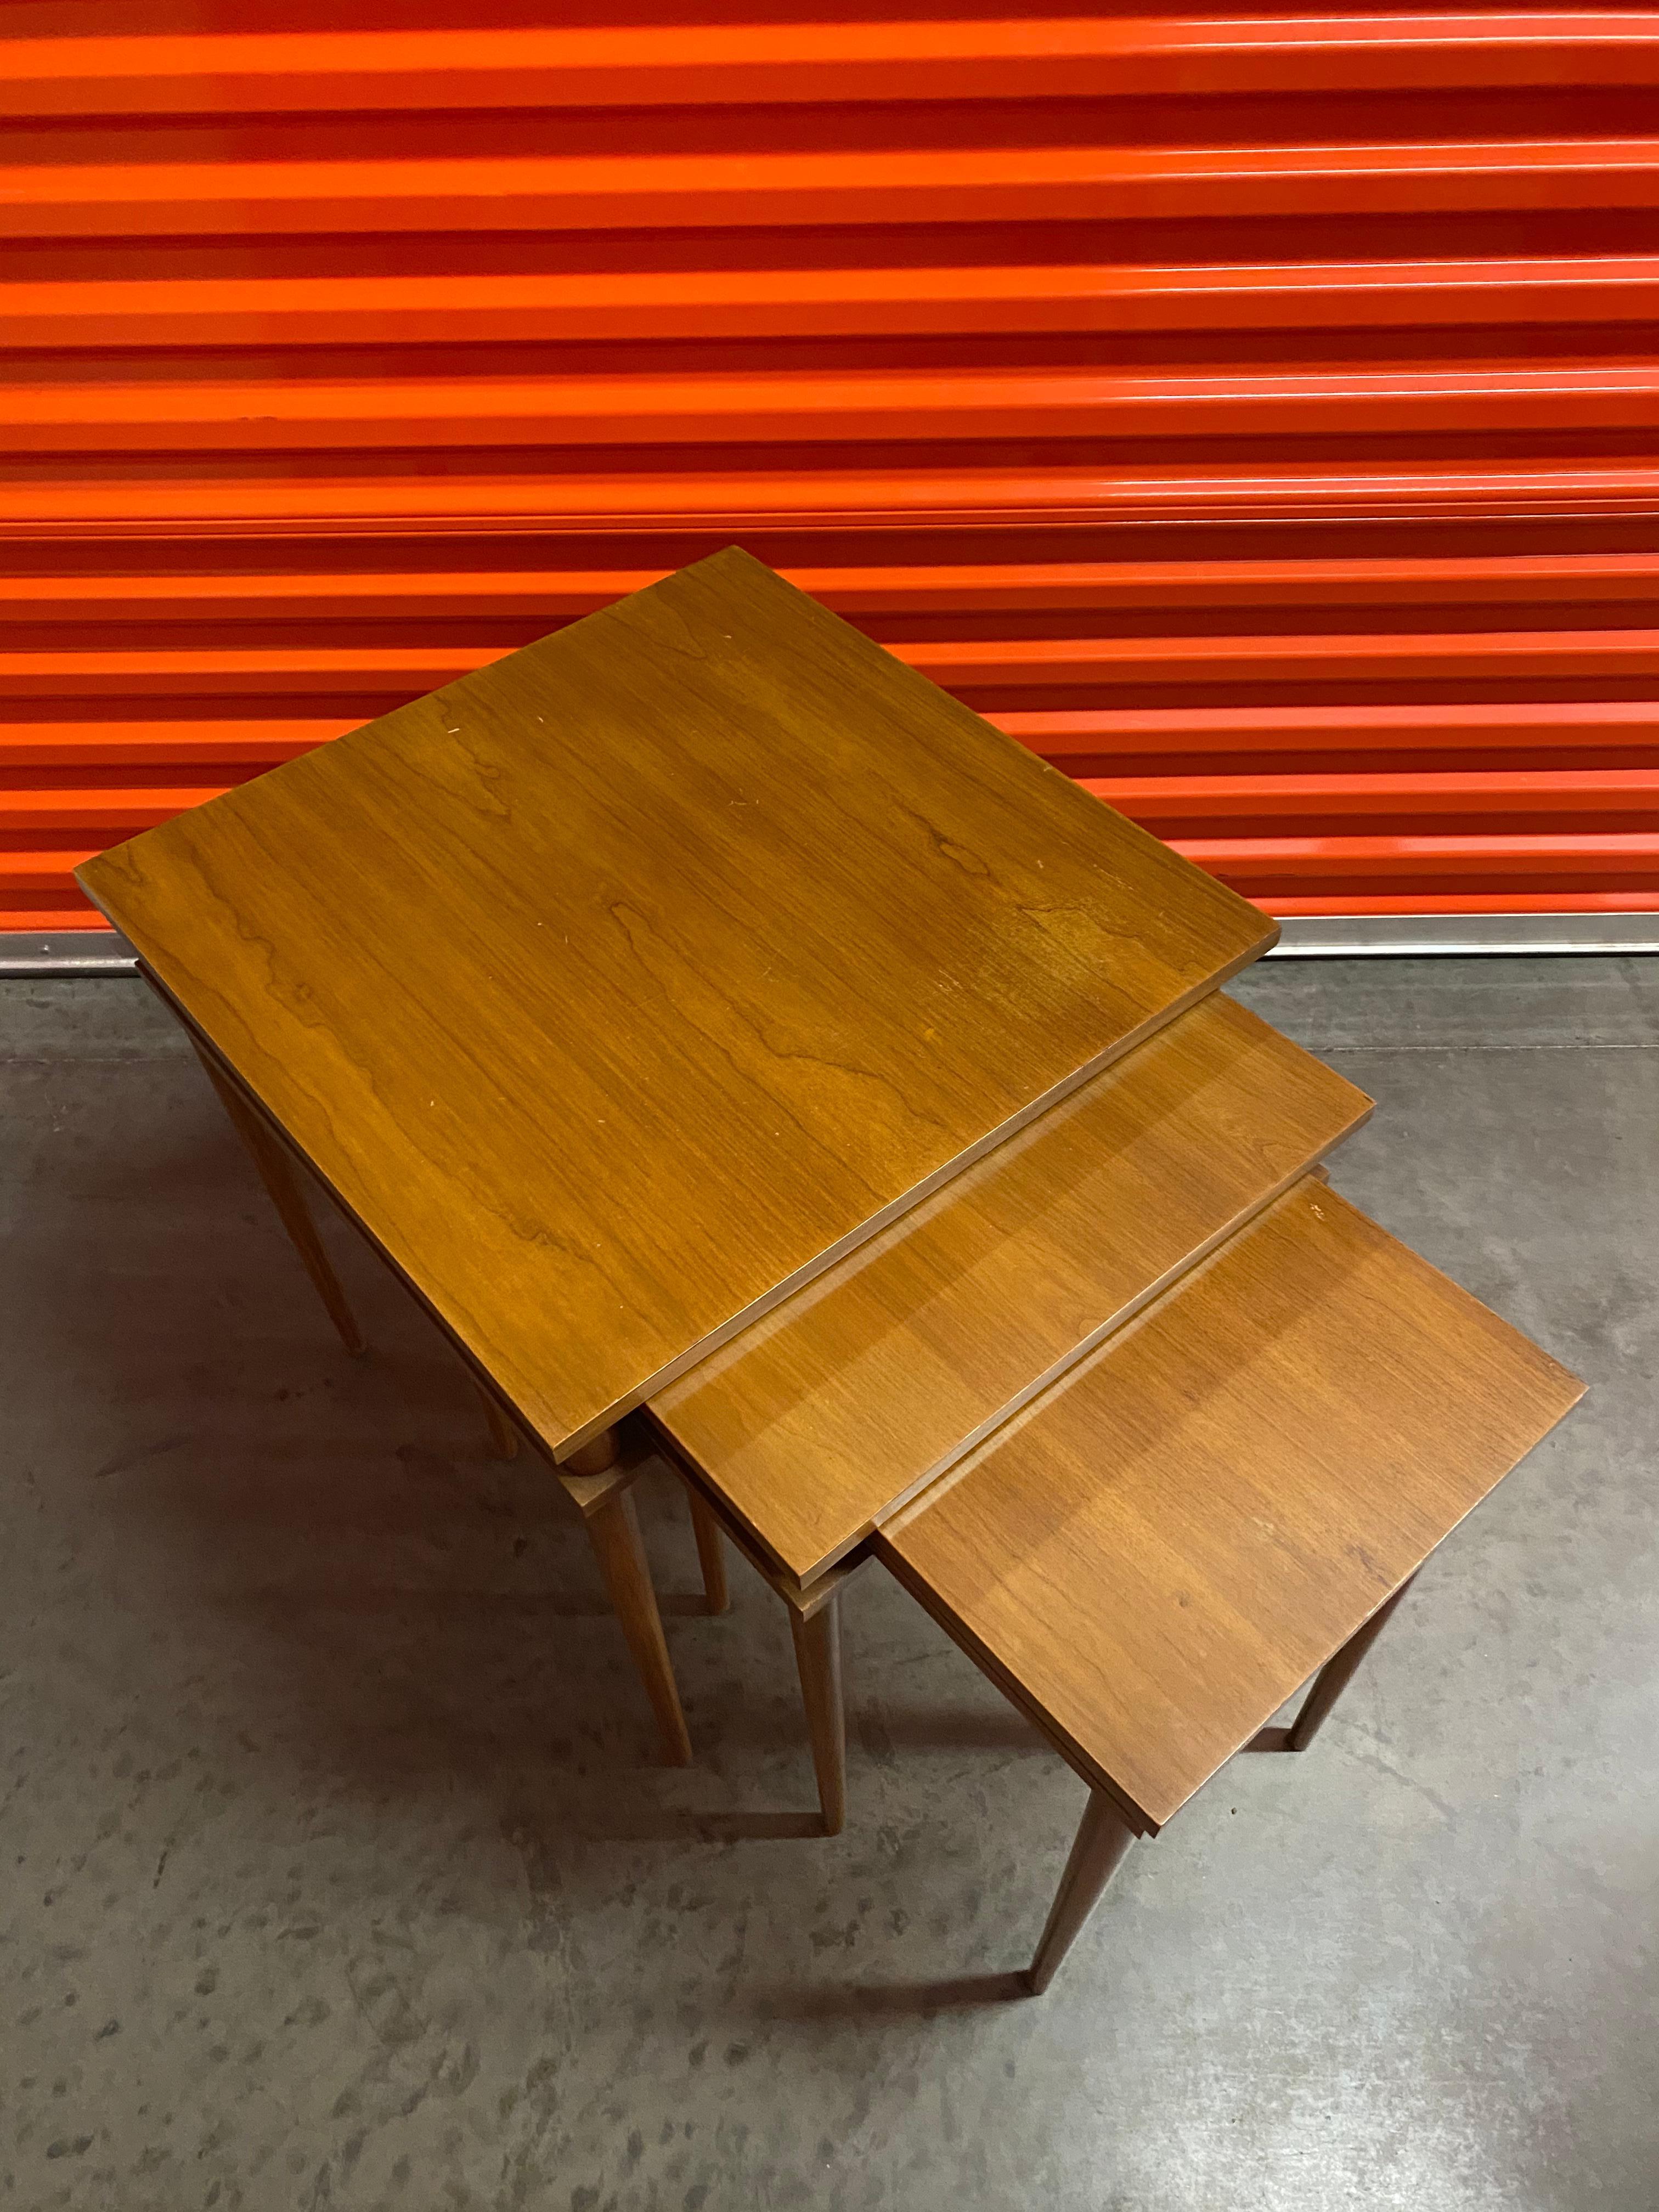 Set of three Mid-Century Modern nesting side tables by John Widdicomb (Co.). Tapered legs and rectangular shape. Beautiful walnut wood grain. Tables nest together under the footprint of the largest table.

Made by John Widdicomb Co., Grand Rapids,